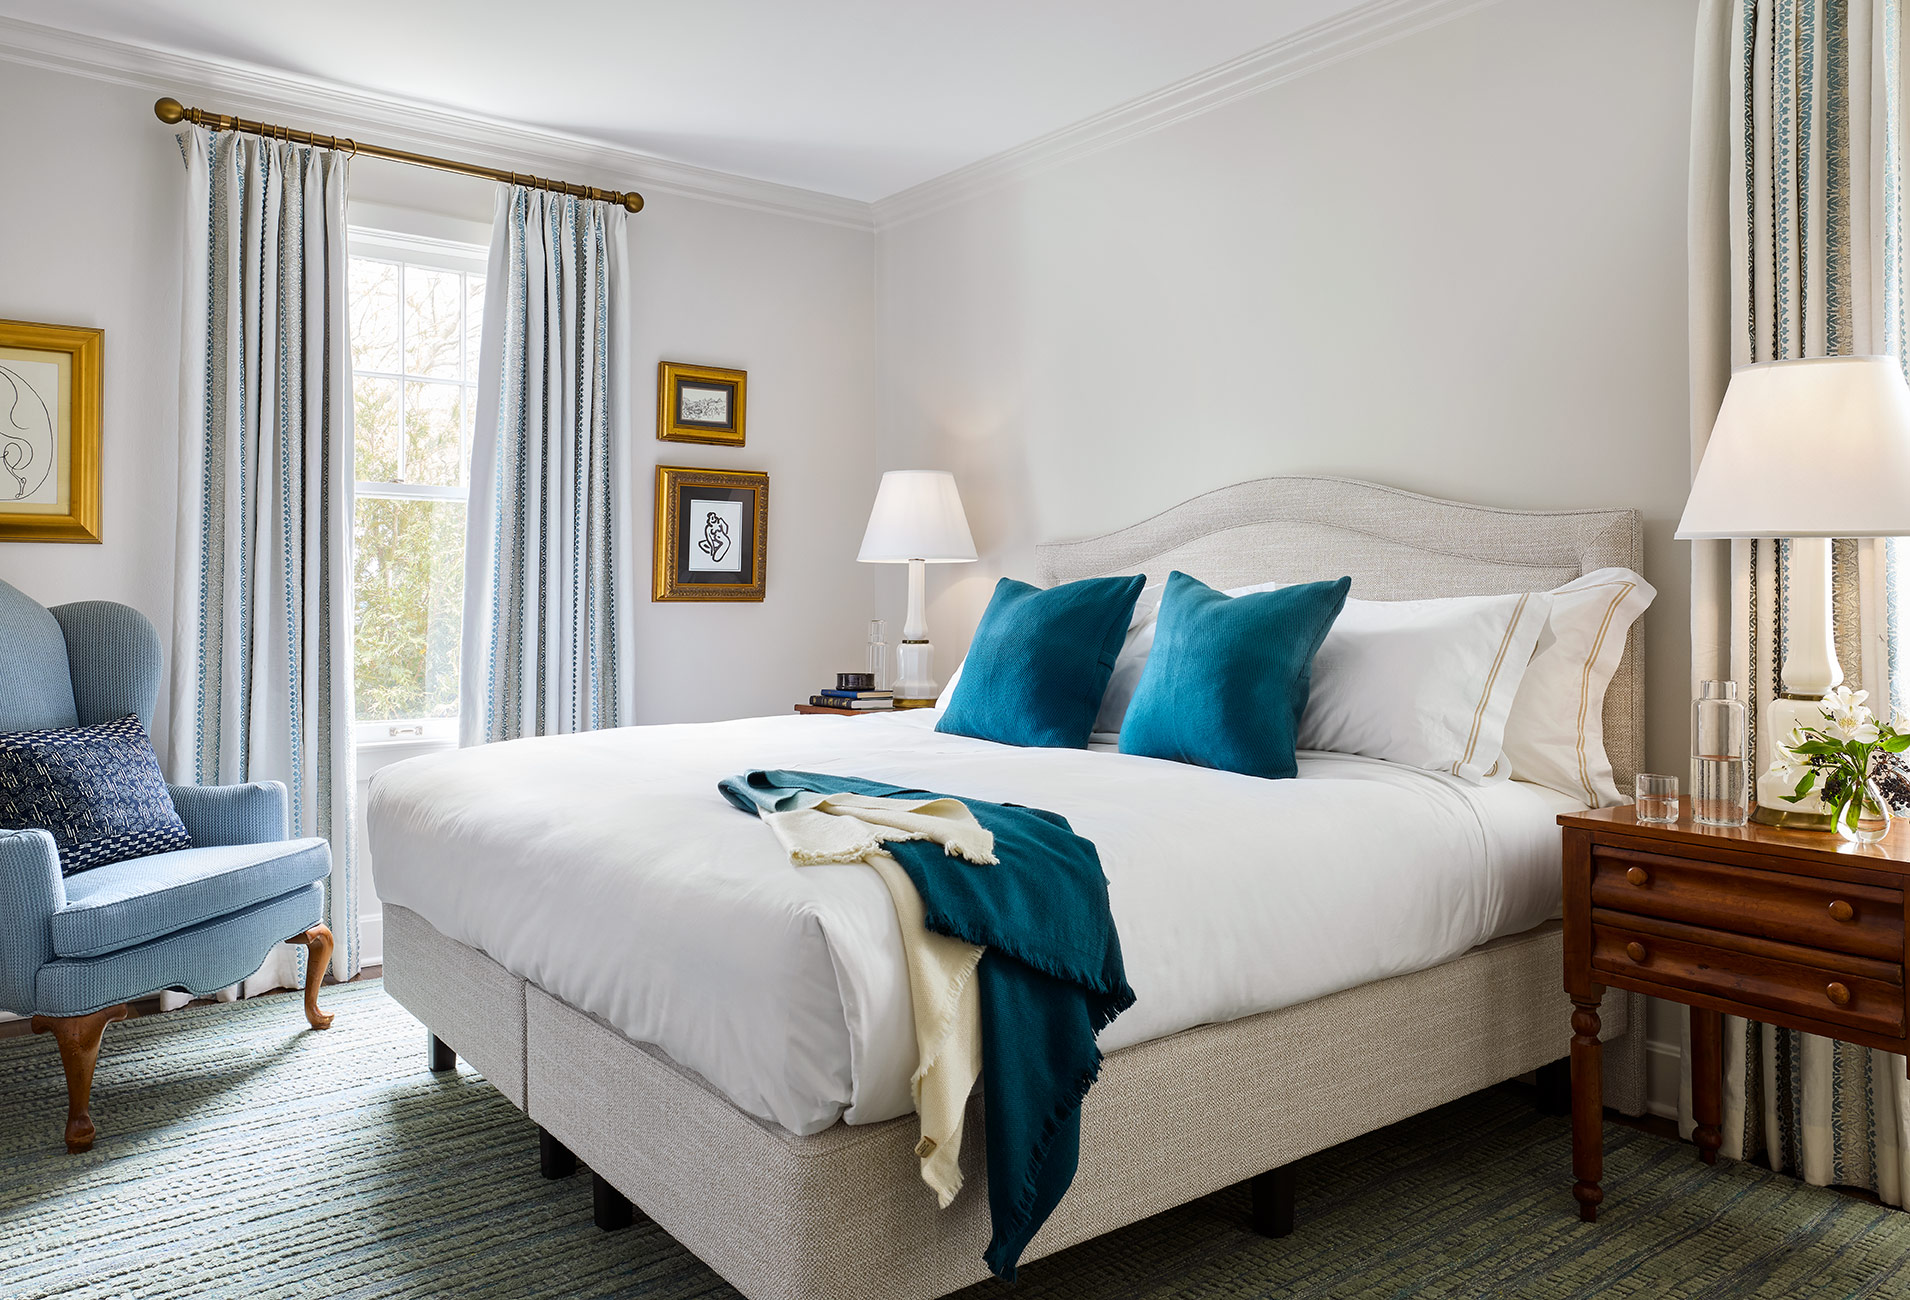 The Wickwood Inn Room No. 2 featuring ALT for Living, SHIIR rugs, Matouk Linens, Vispring bed from The Luxury Bed Collection, and Cowtan & Tout.